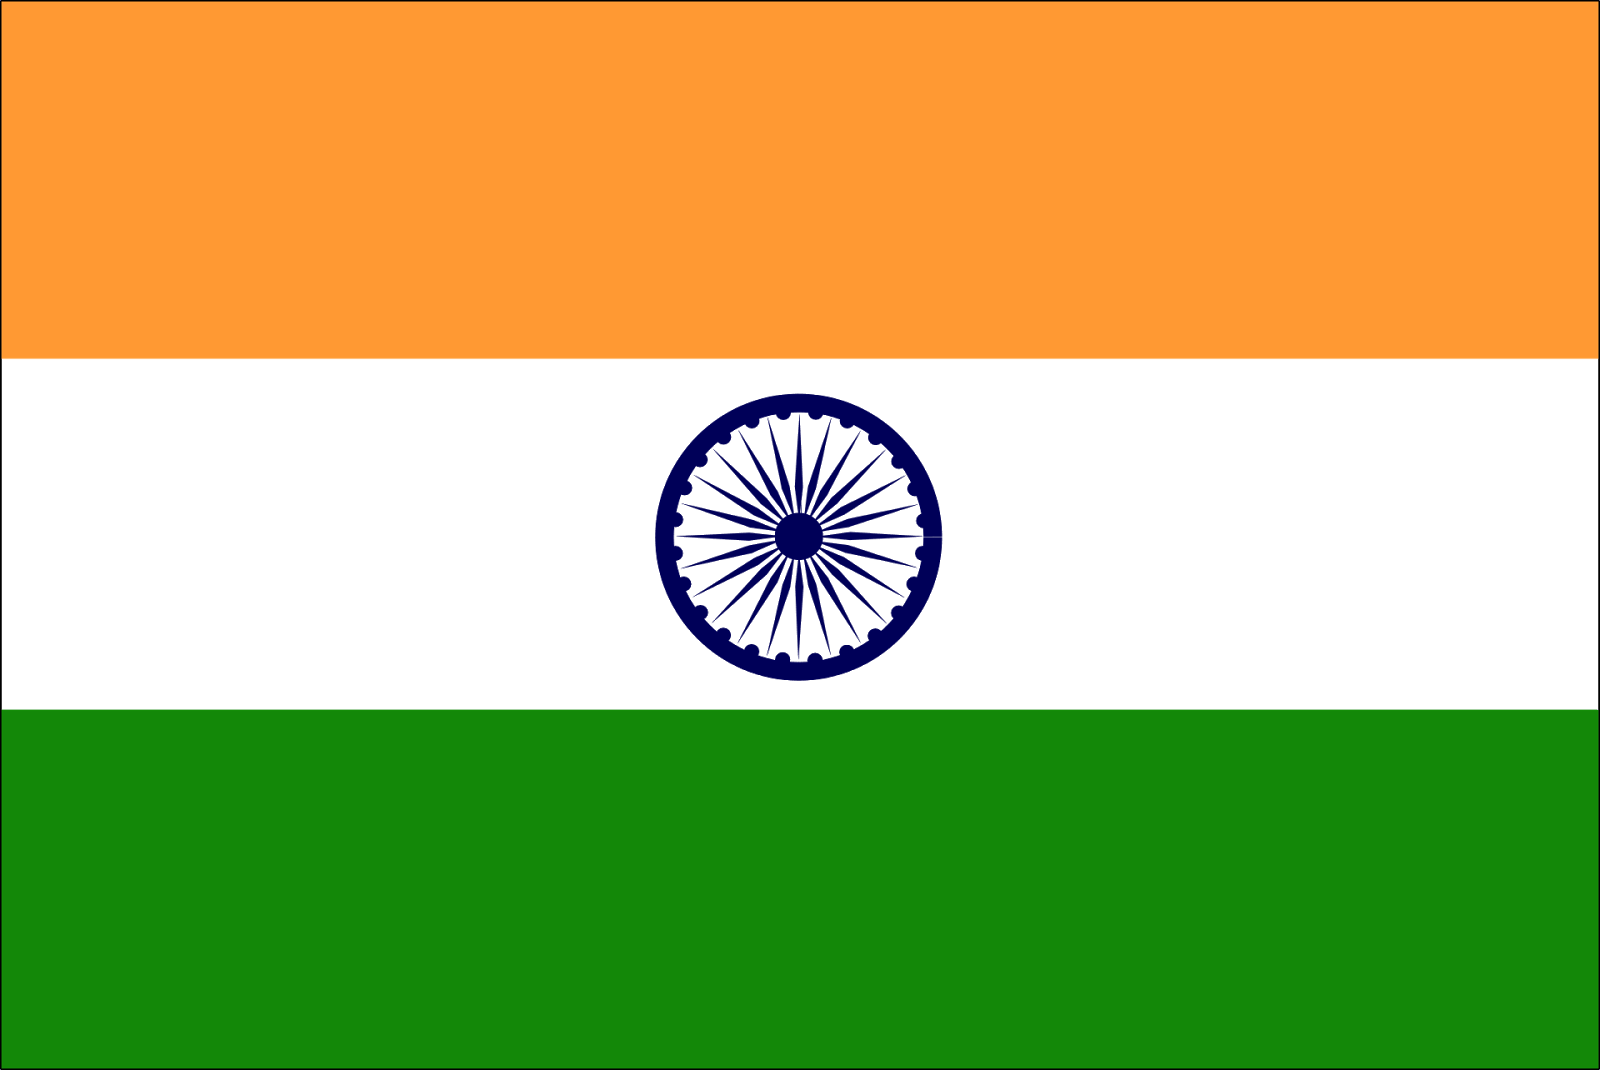 Happy Republic Day 2018 Image Wallpaper Free Download. Indian